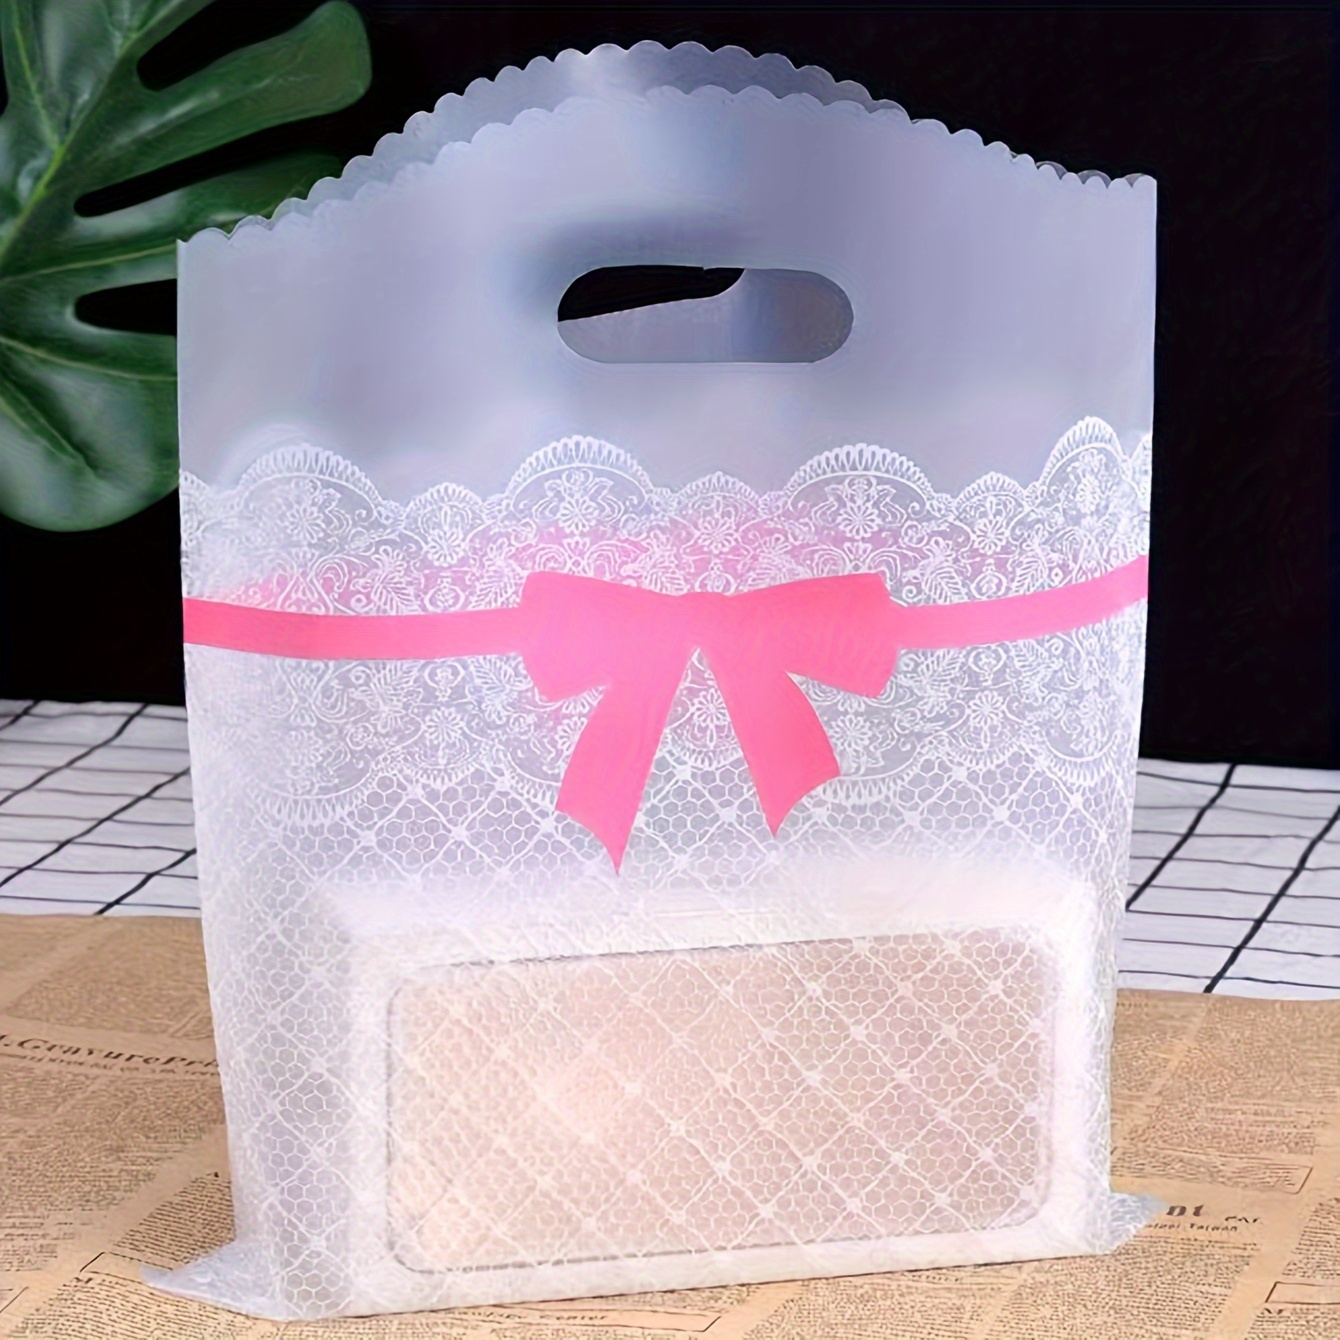 

50pcs, Fresh & Cute Transparent Gift Bags, Lace Bow Pattern Tote Bags, Cosmetic Eyeglasses Bags, Jewelry Bags, Souvenirs, Shopping Bags, Party Supplies